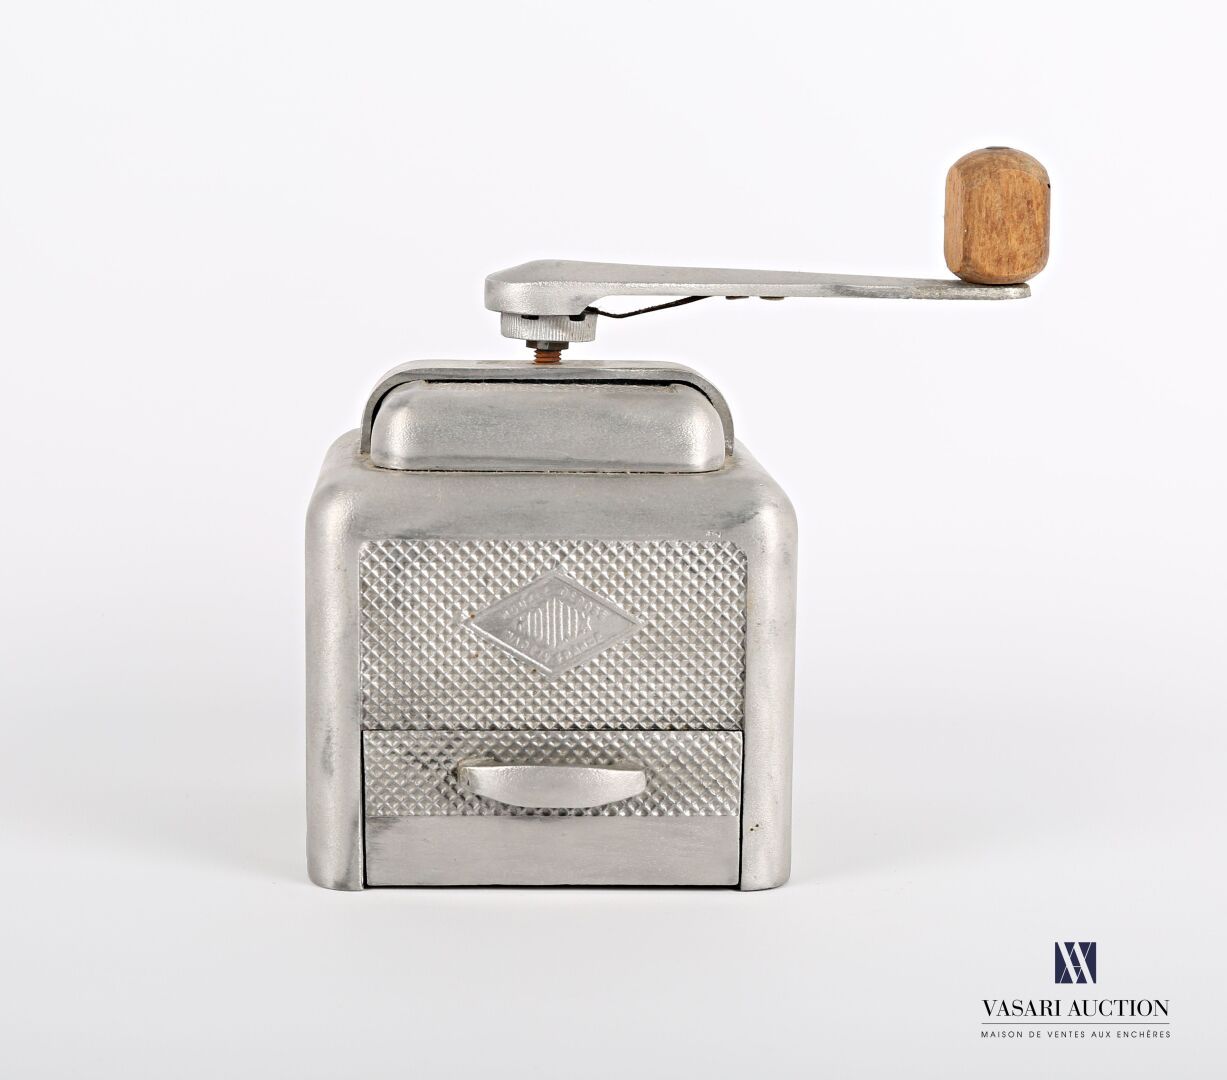 Moulux Coffee Grinder In Silver Painted